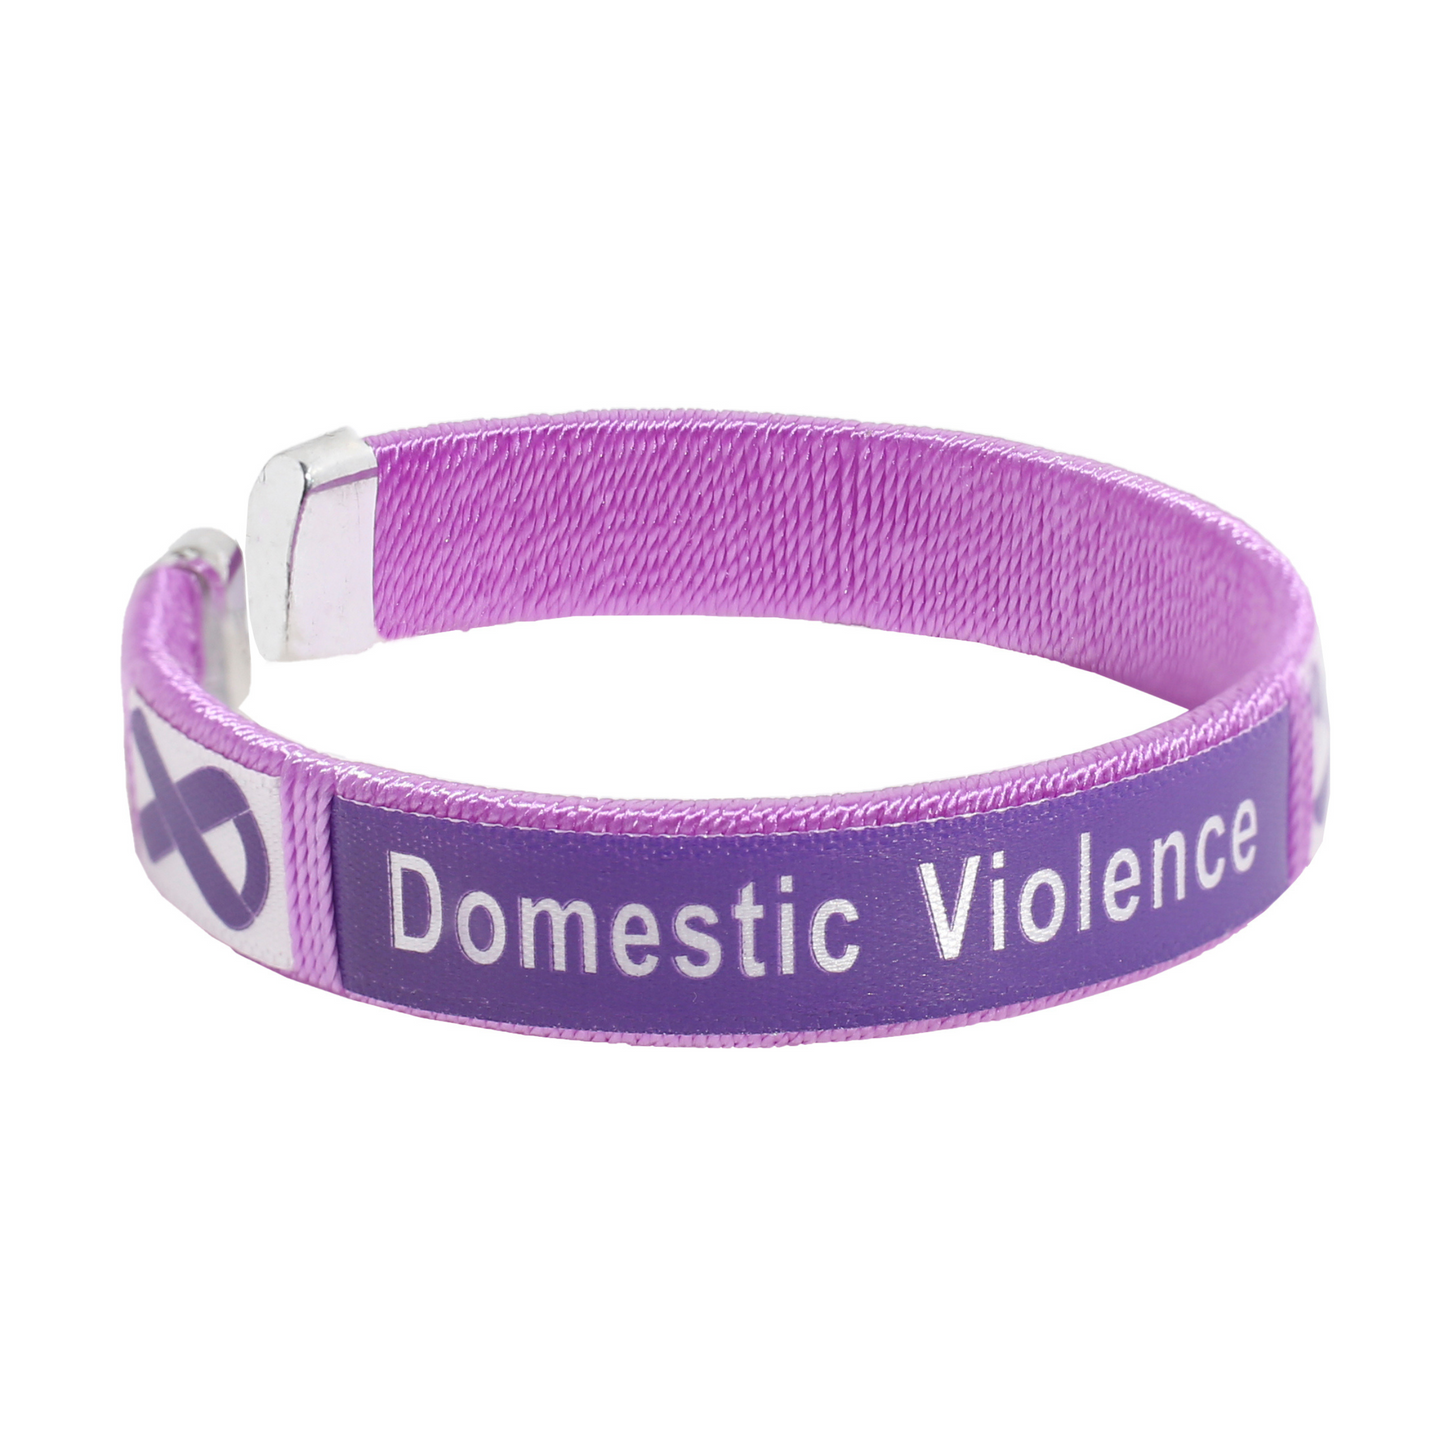 Domestic Violence and Prevention Wristbands for Events